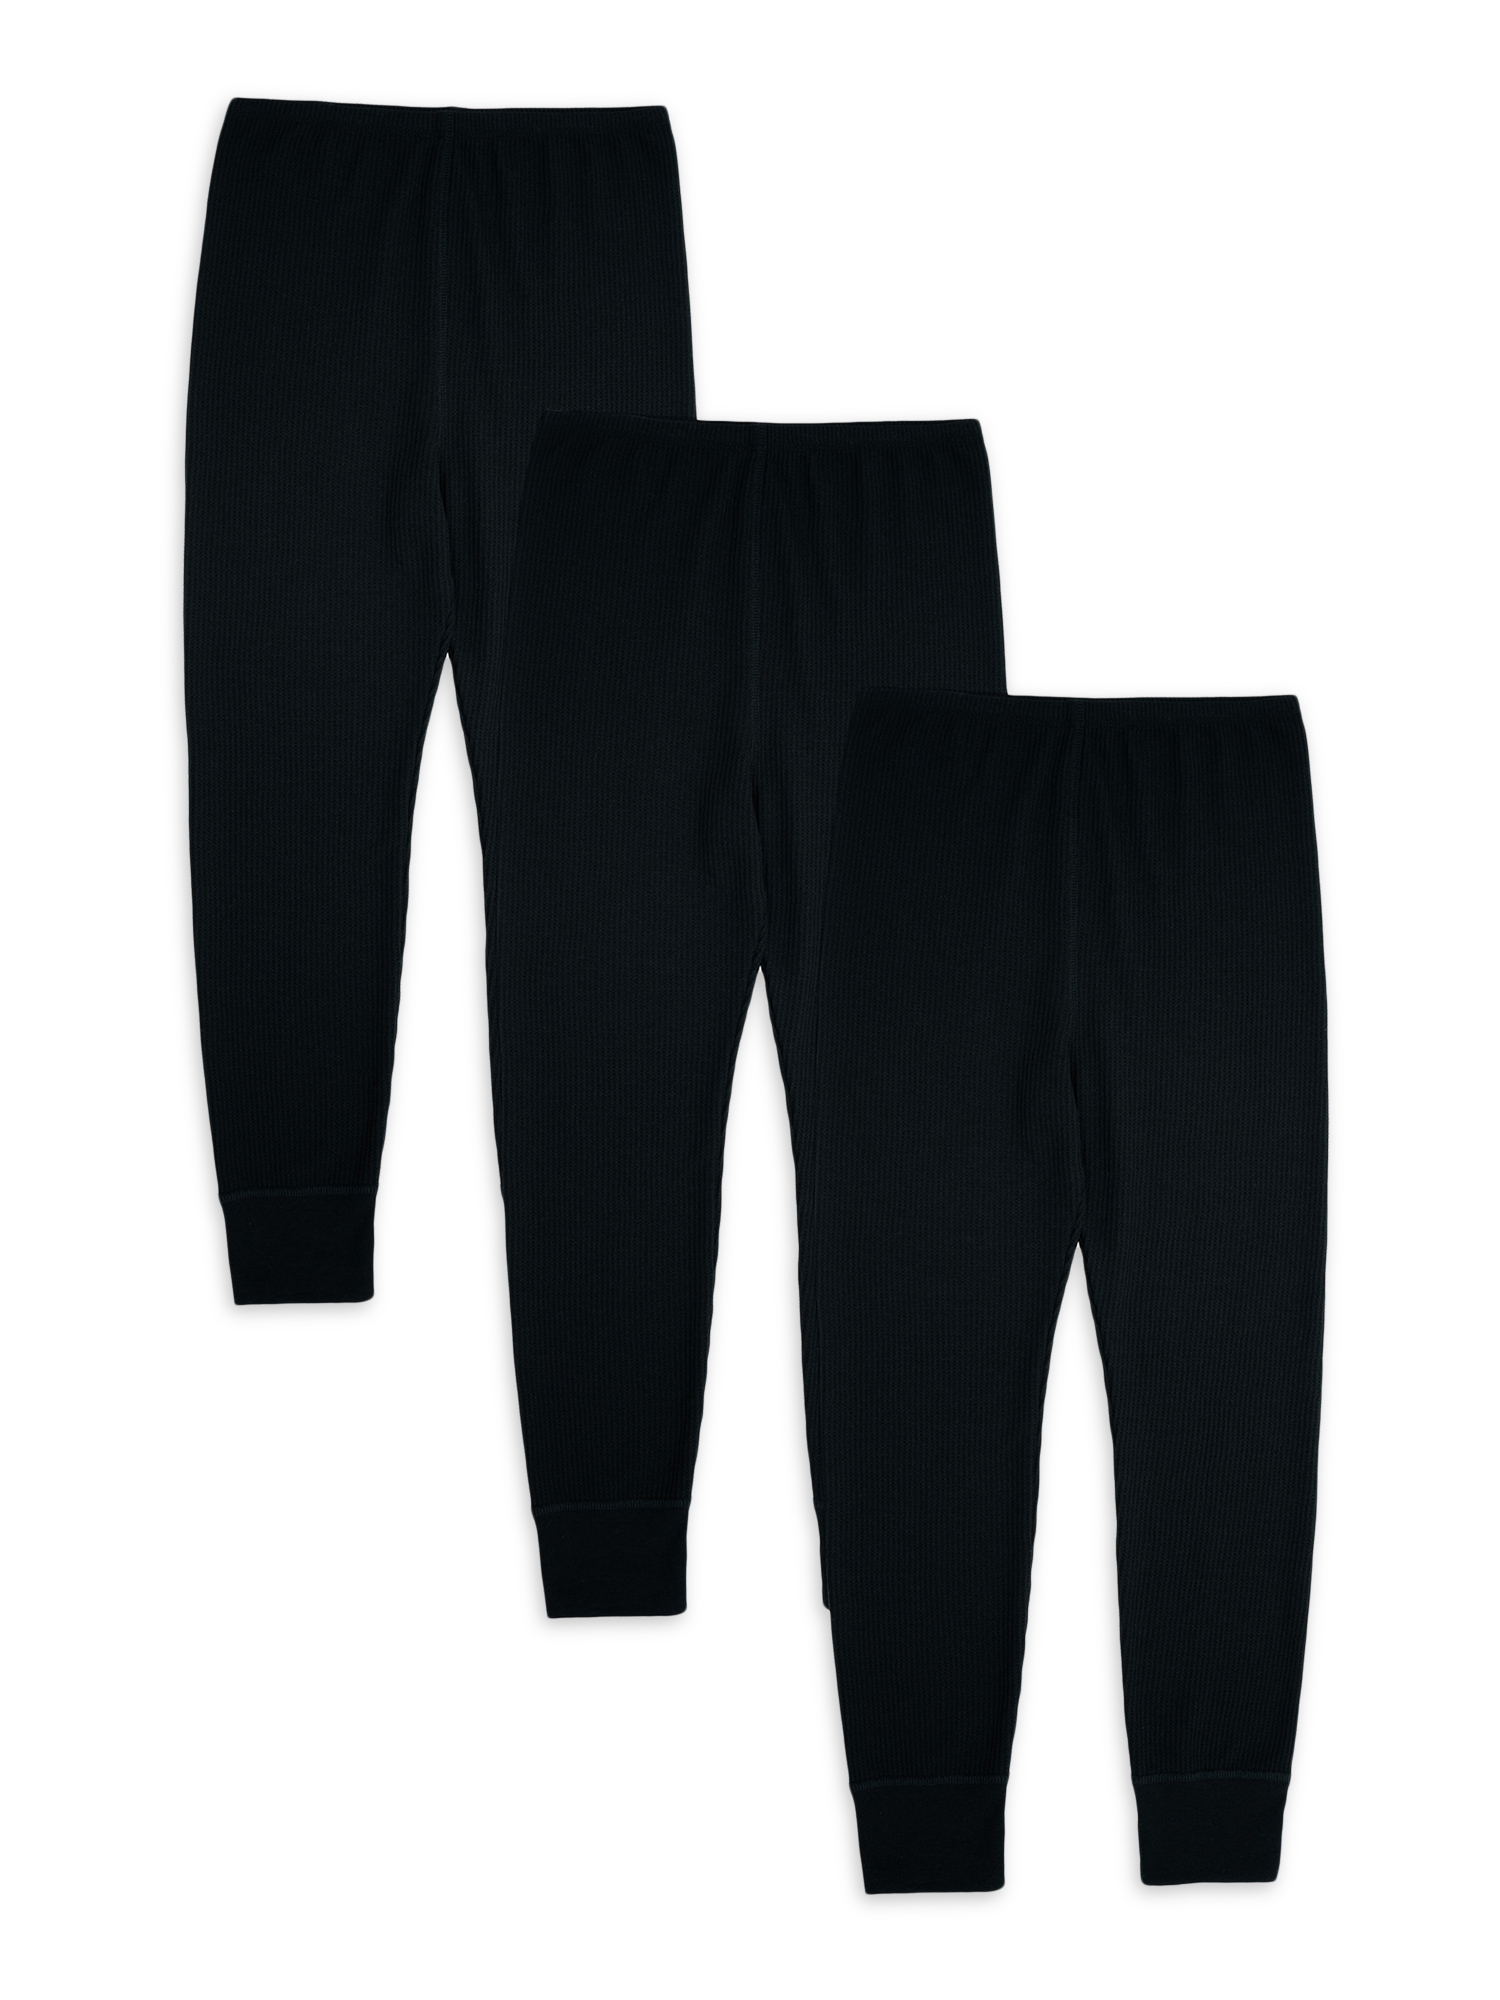 Fruit of the Loom Boy's & Girl's Waffle Thermal Bottoms, 3-Pack Set, Sizes 4-18 - image 1 of 5